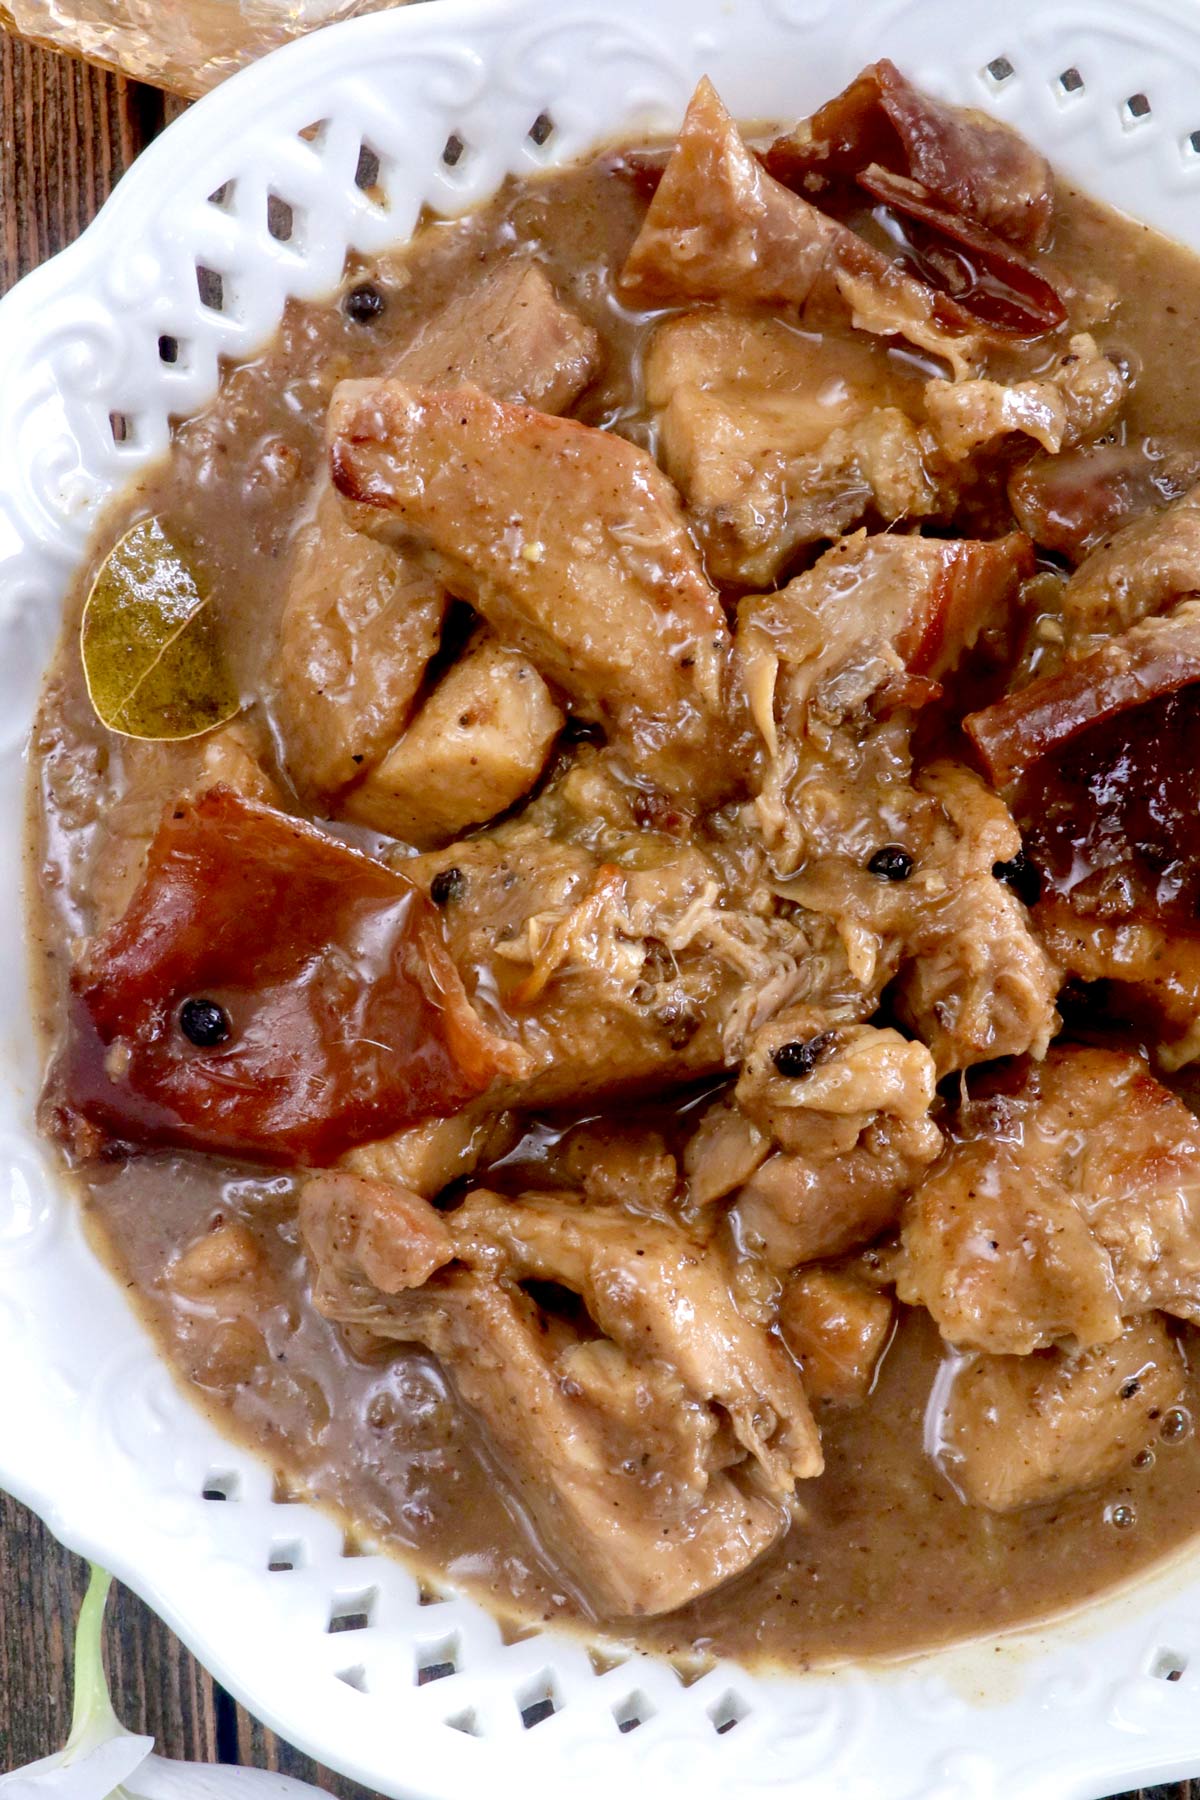 Paksiw na lechon made with leftover lechon simmered in vinegar, aromatics, and lechon sauce.